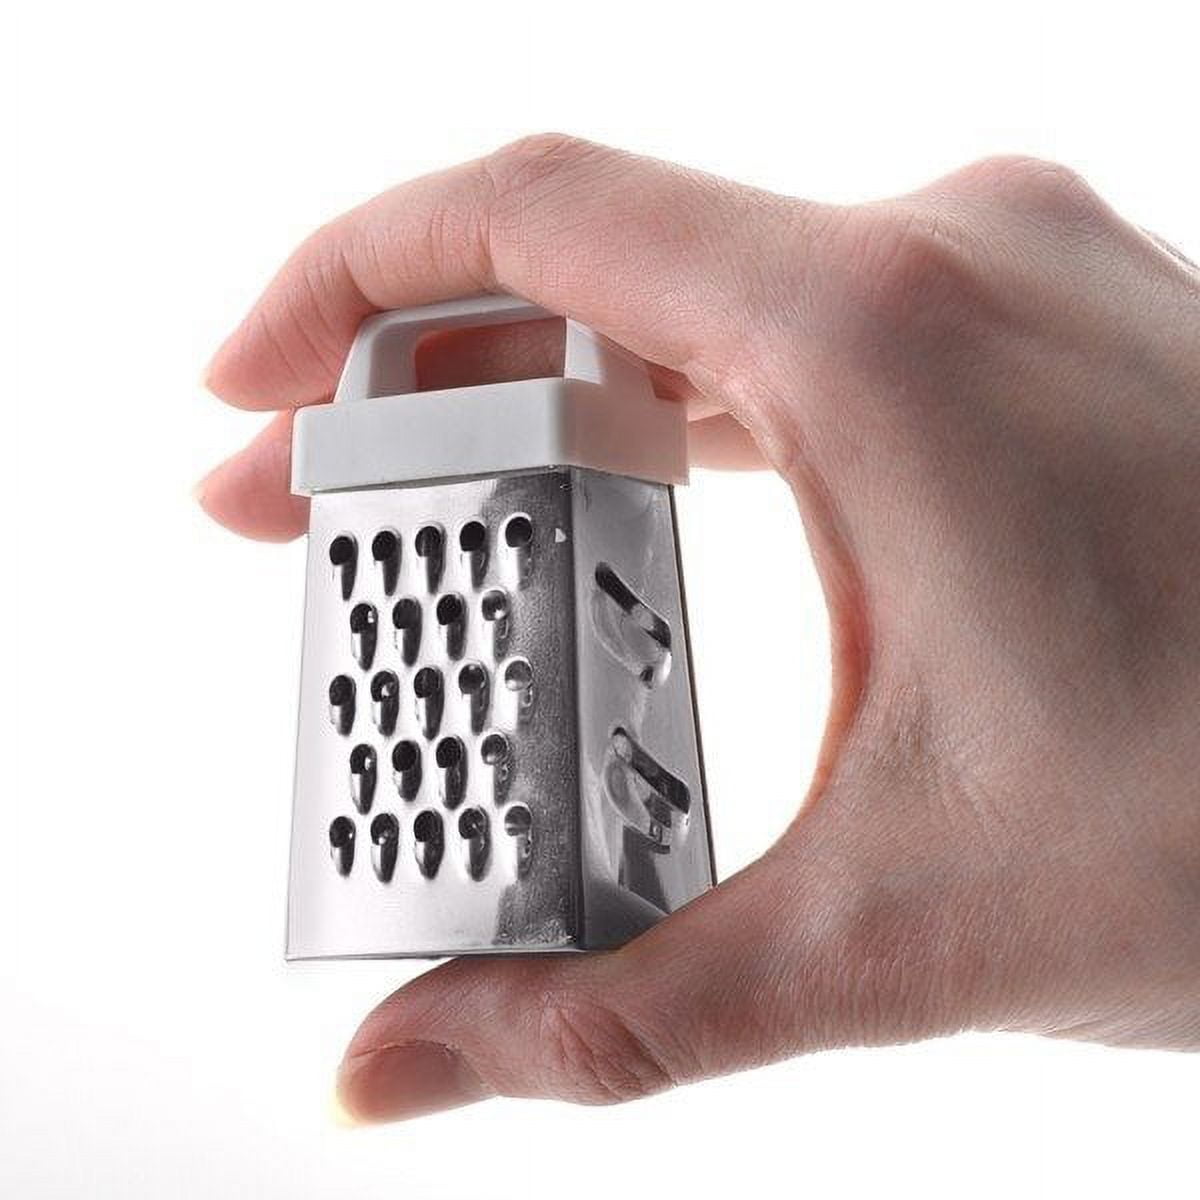 Tramontina Mini Utility Grater in Stainless Steel with Black Polypropylene Handle 25640100